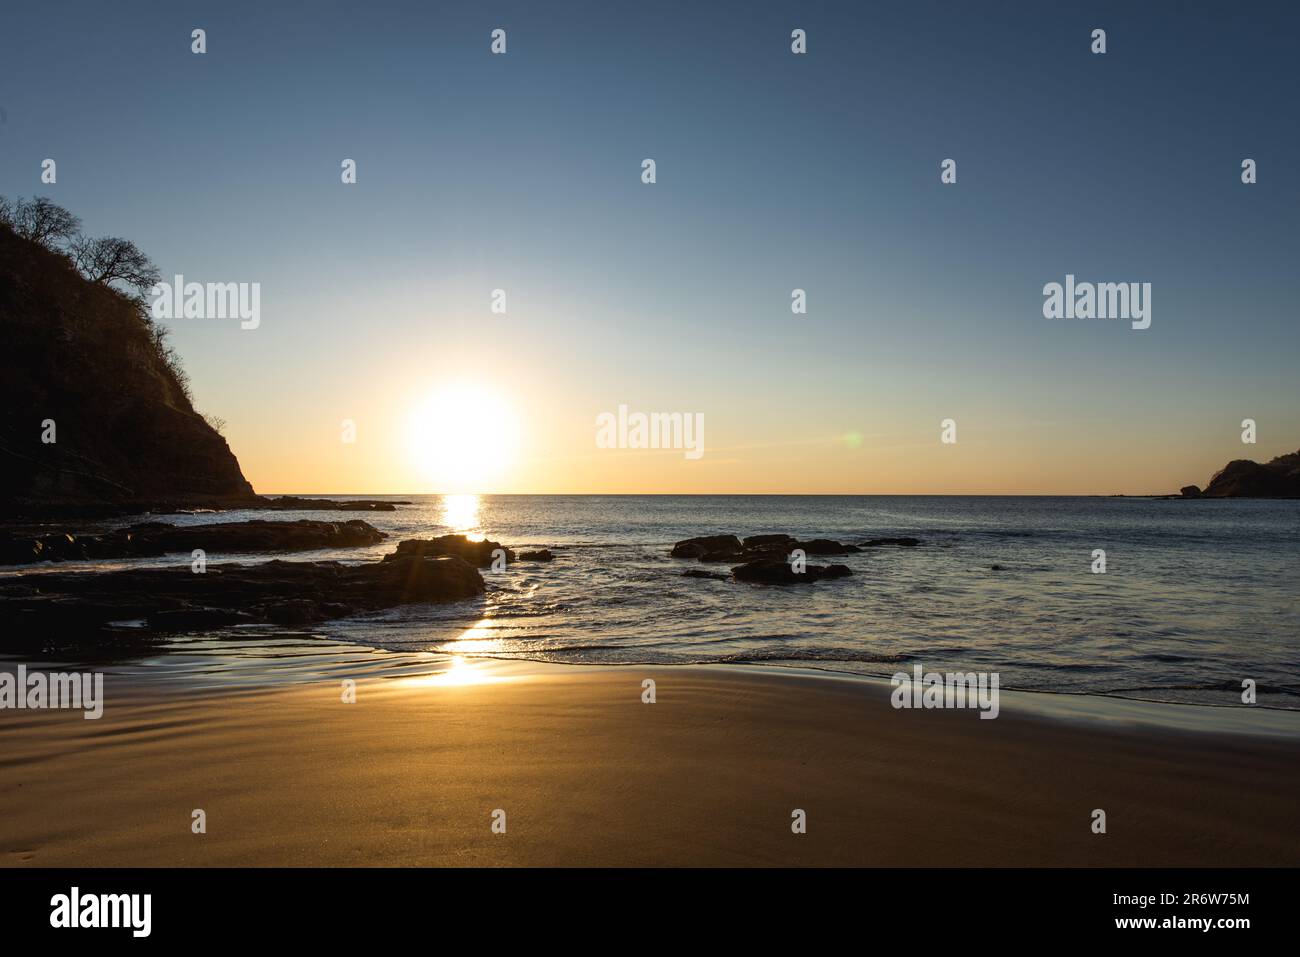 Sunset landscape photo with clear sky overlooking the sandy beach facing the Atlantic ocean in Nicaragua near San Juan del Sur Stock Photo